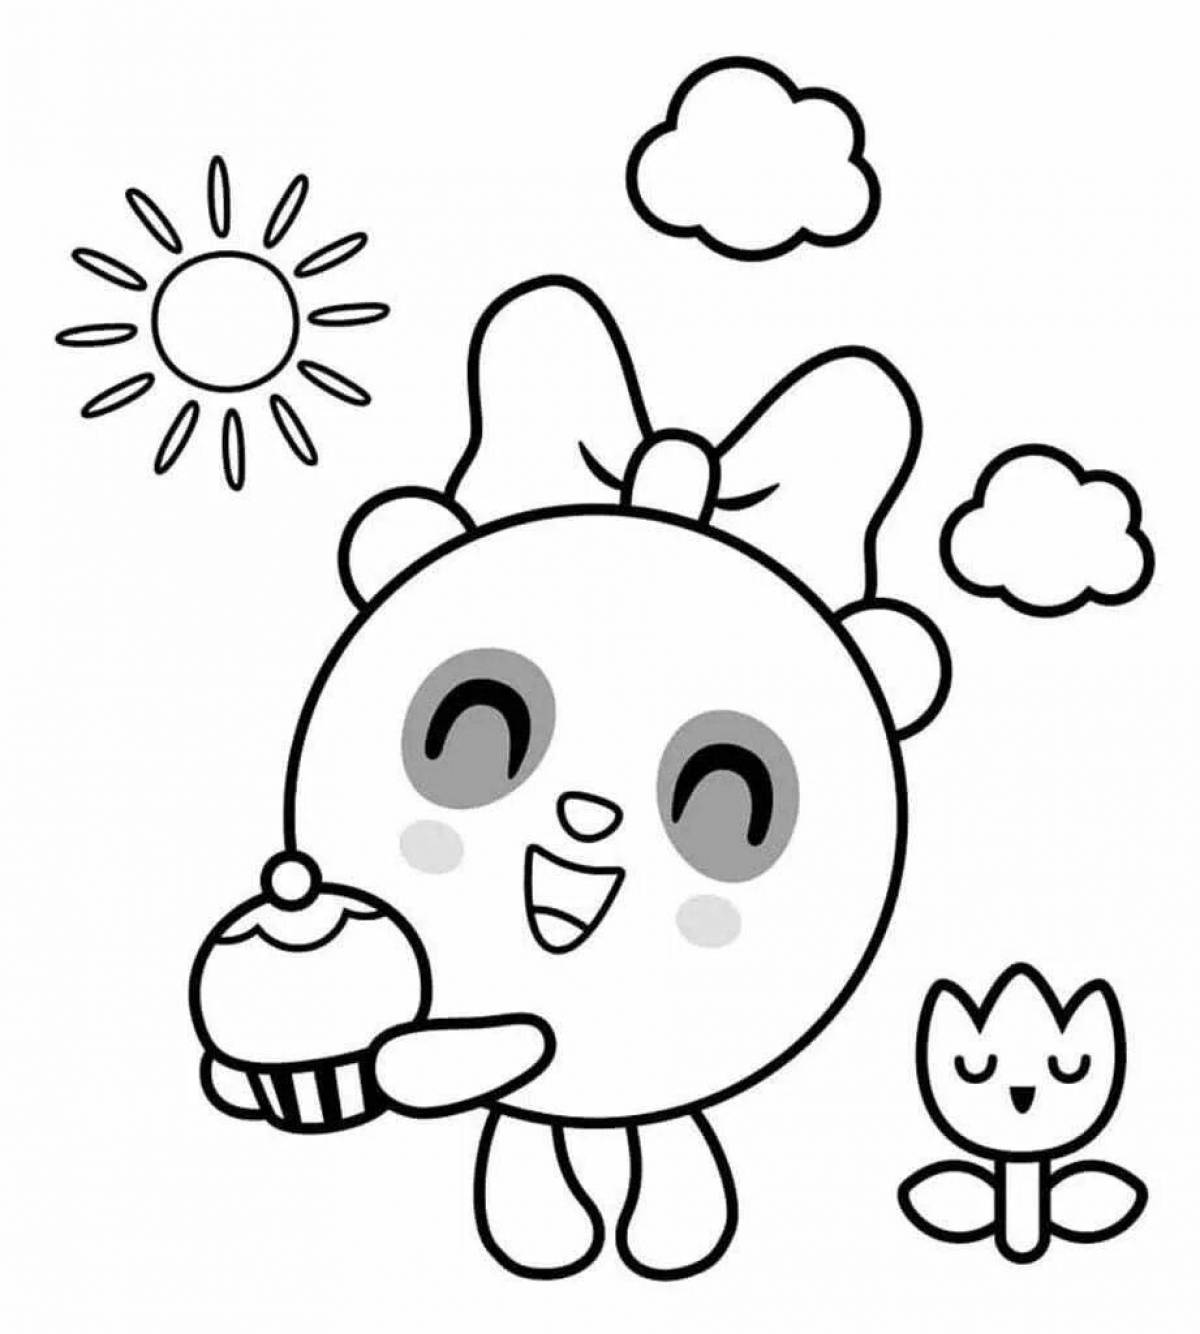 Cute coloring pages for kids, new series